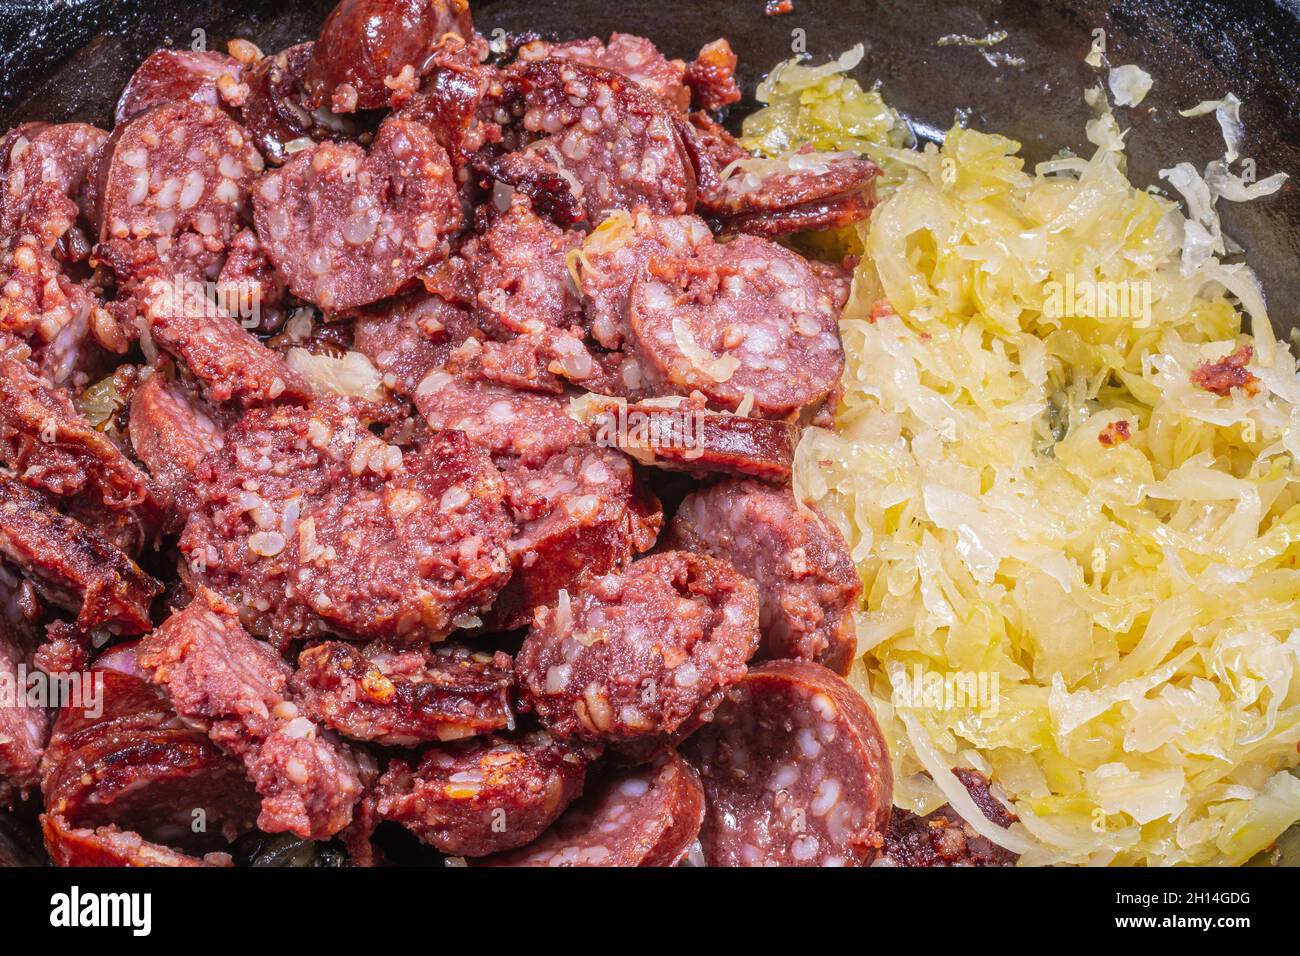 Fried Sausage slices with barley grains and Sauerkraut on cast iron frying pan Stock Photo